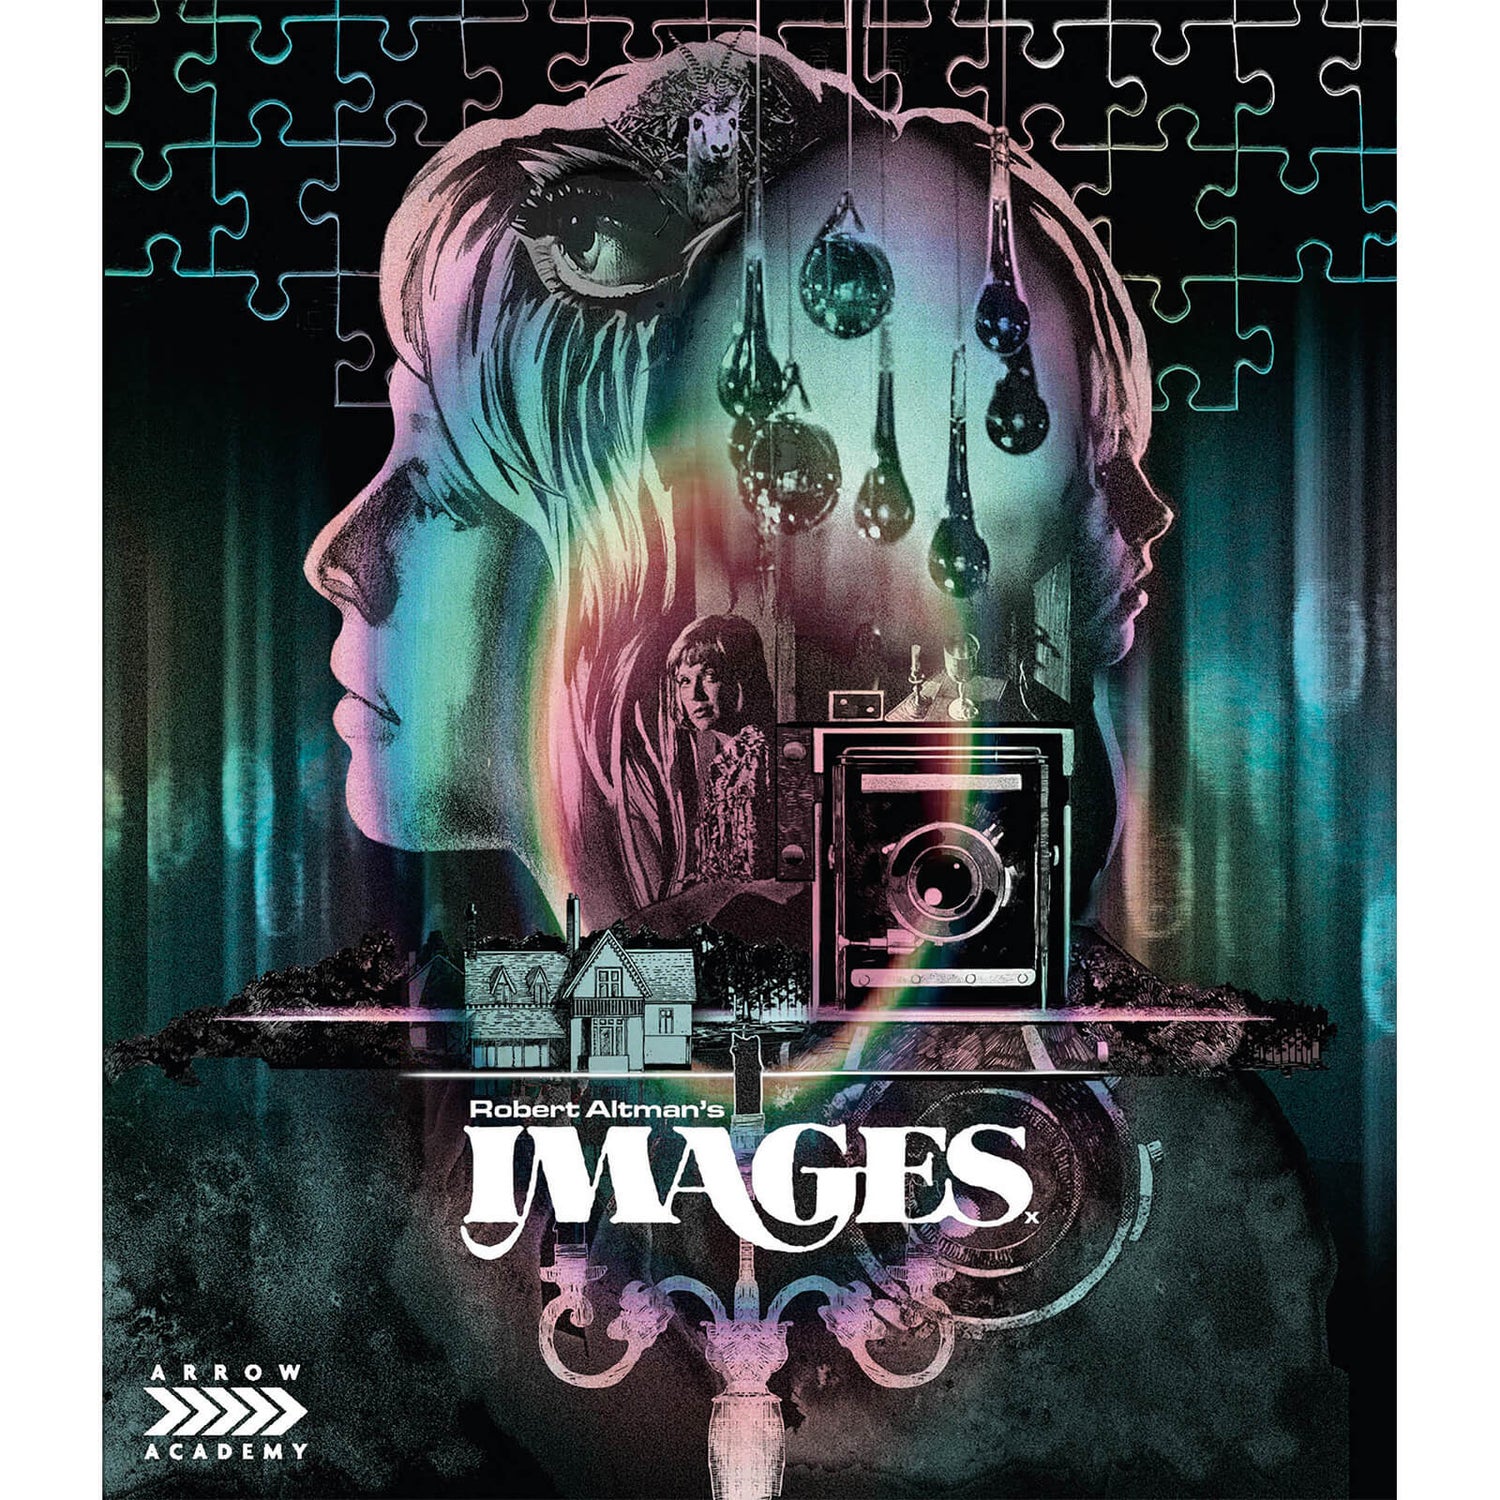 Images Blu-ray